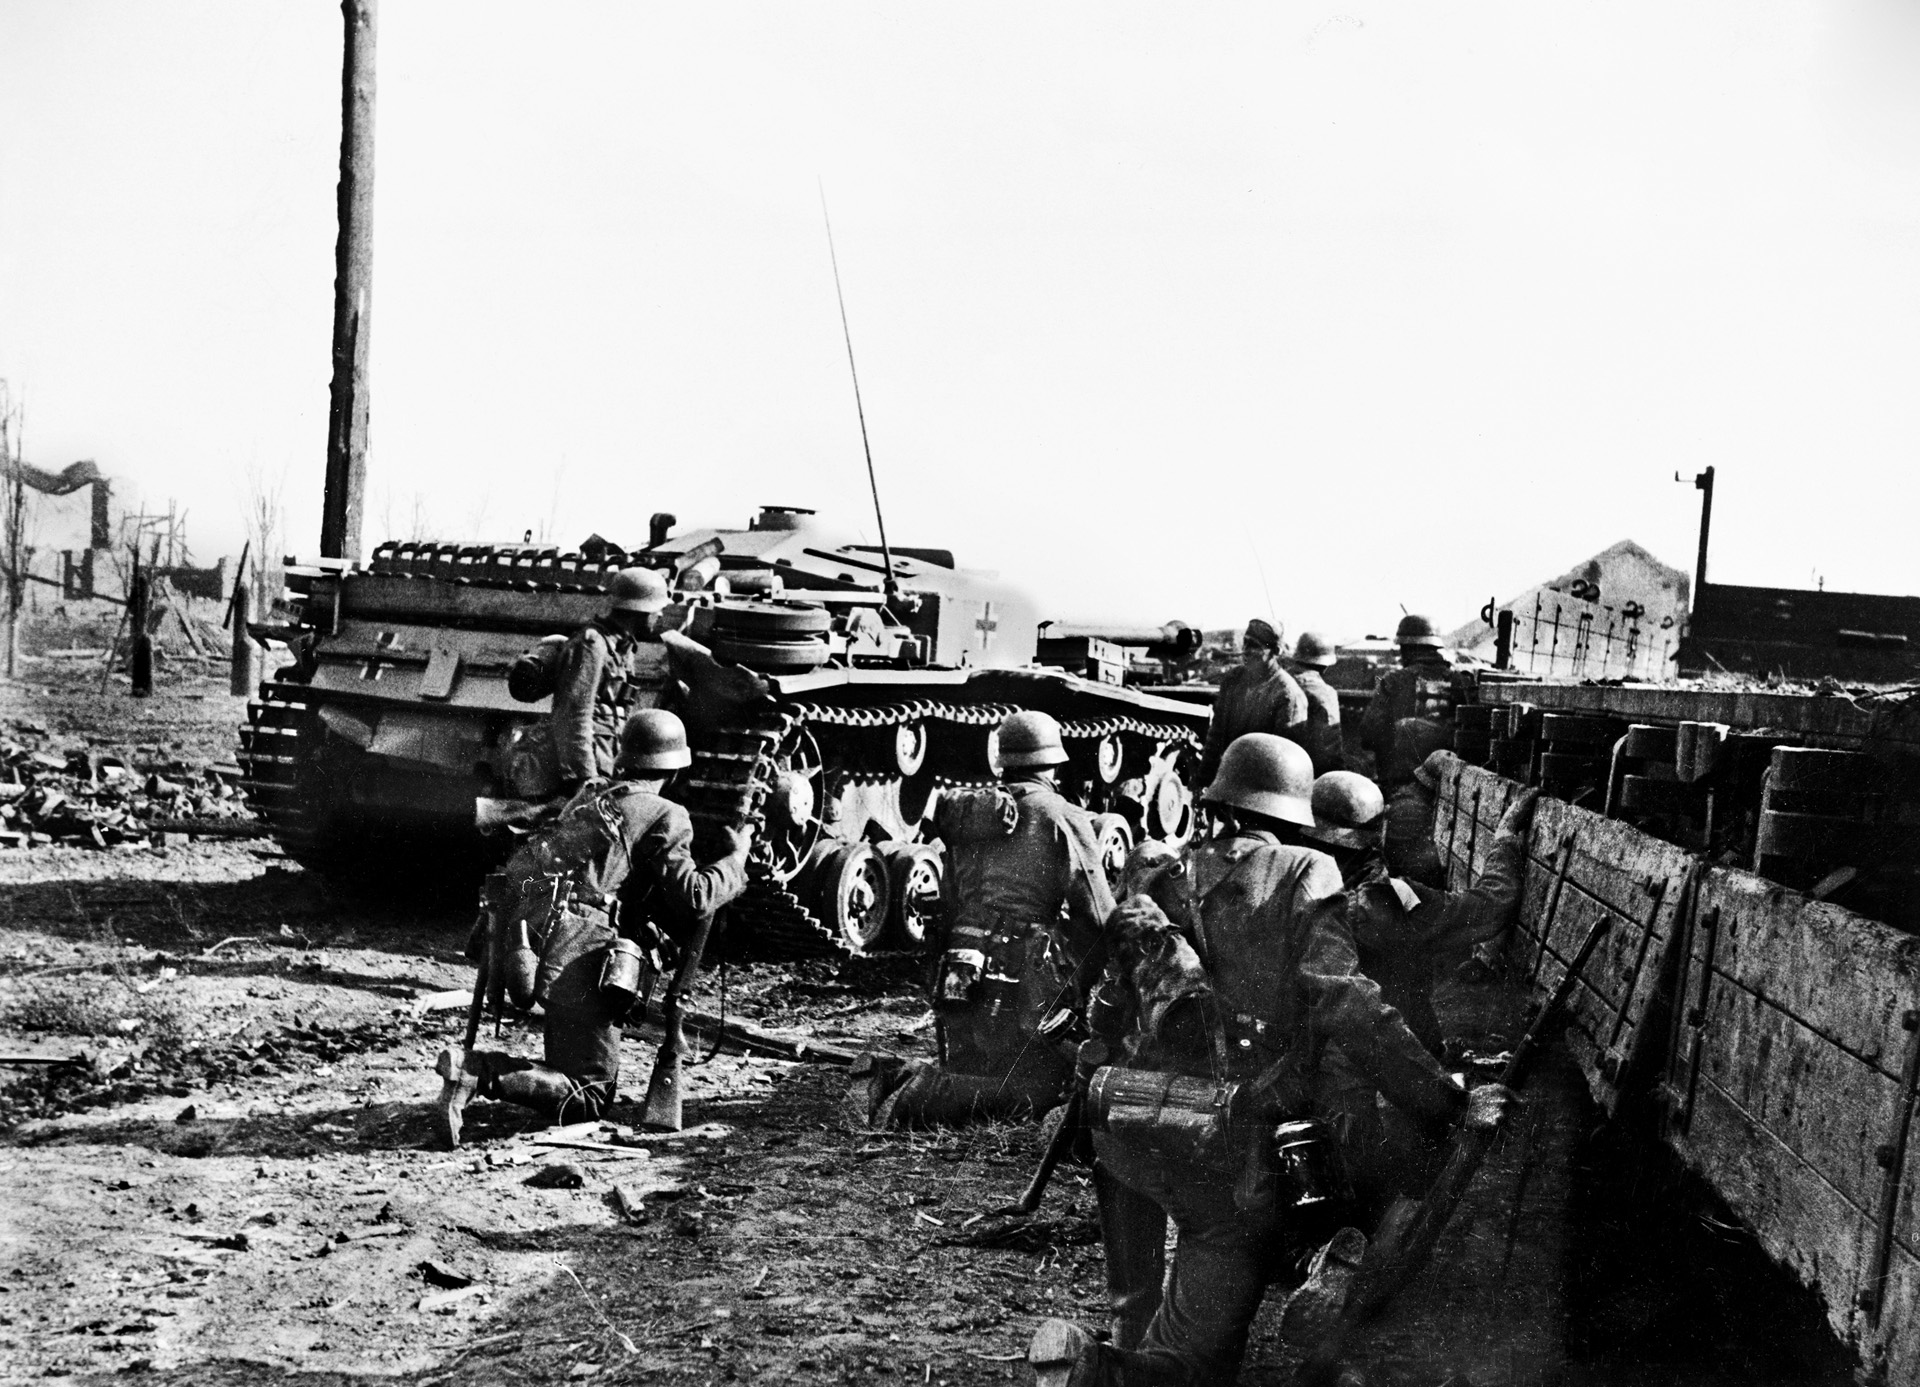 German infantrymen follow their armored vehicles on the advance into Stalingrad. Few if any of the Nazi soldiers would survive the meat-grinder battle.